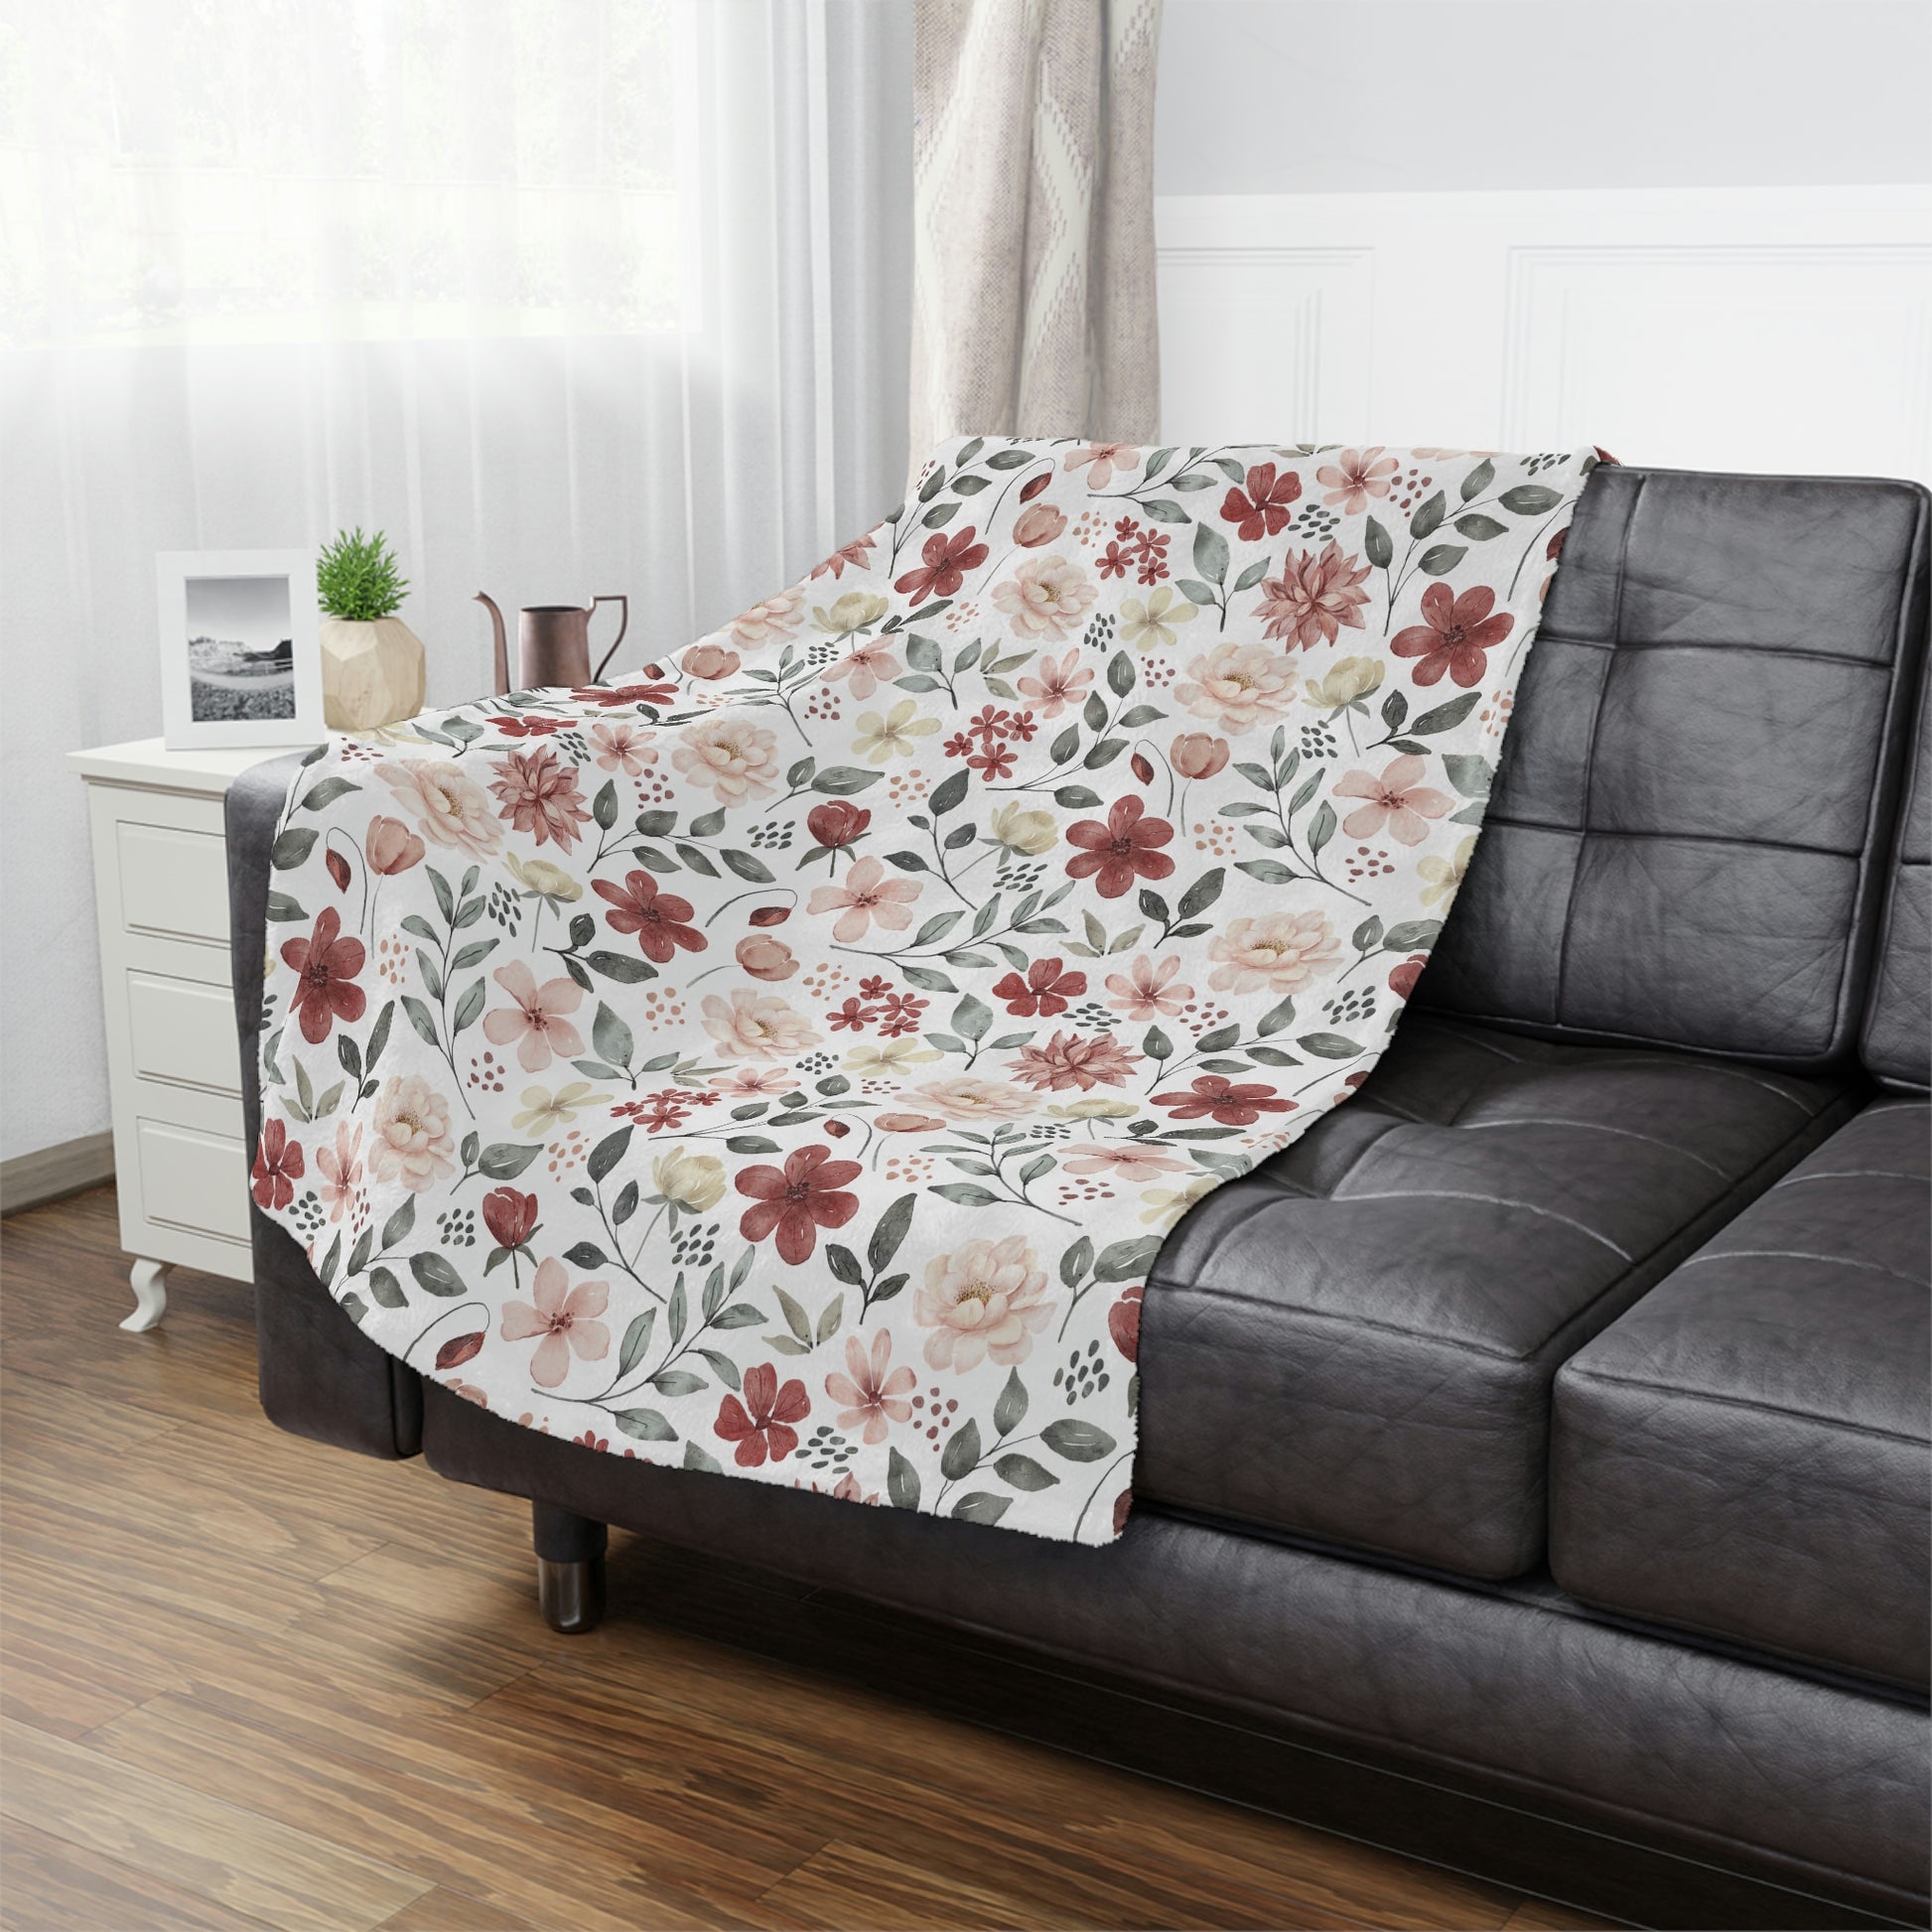 red flowers on a white plush blanket, red and green floral throw blanket lying on a bed with pillows